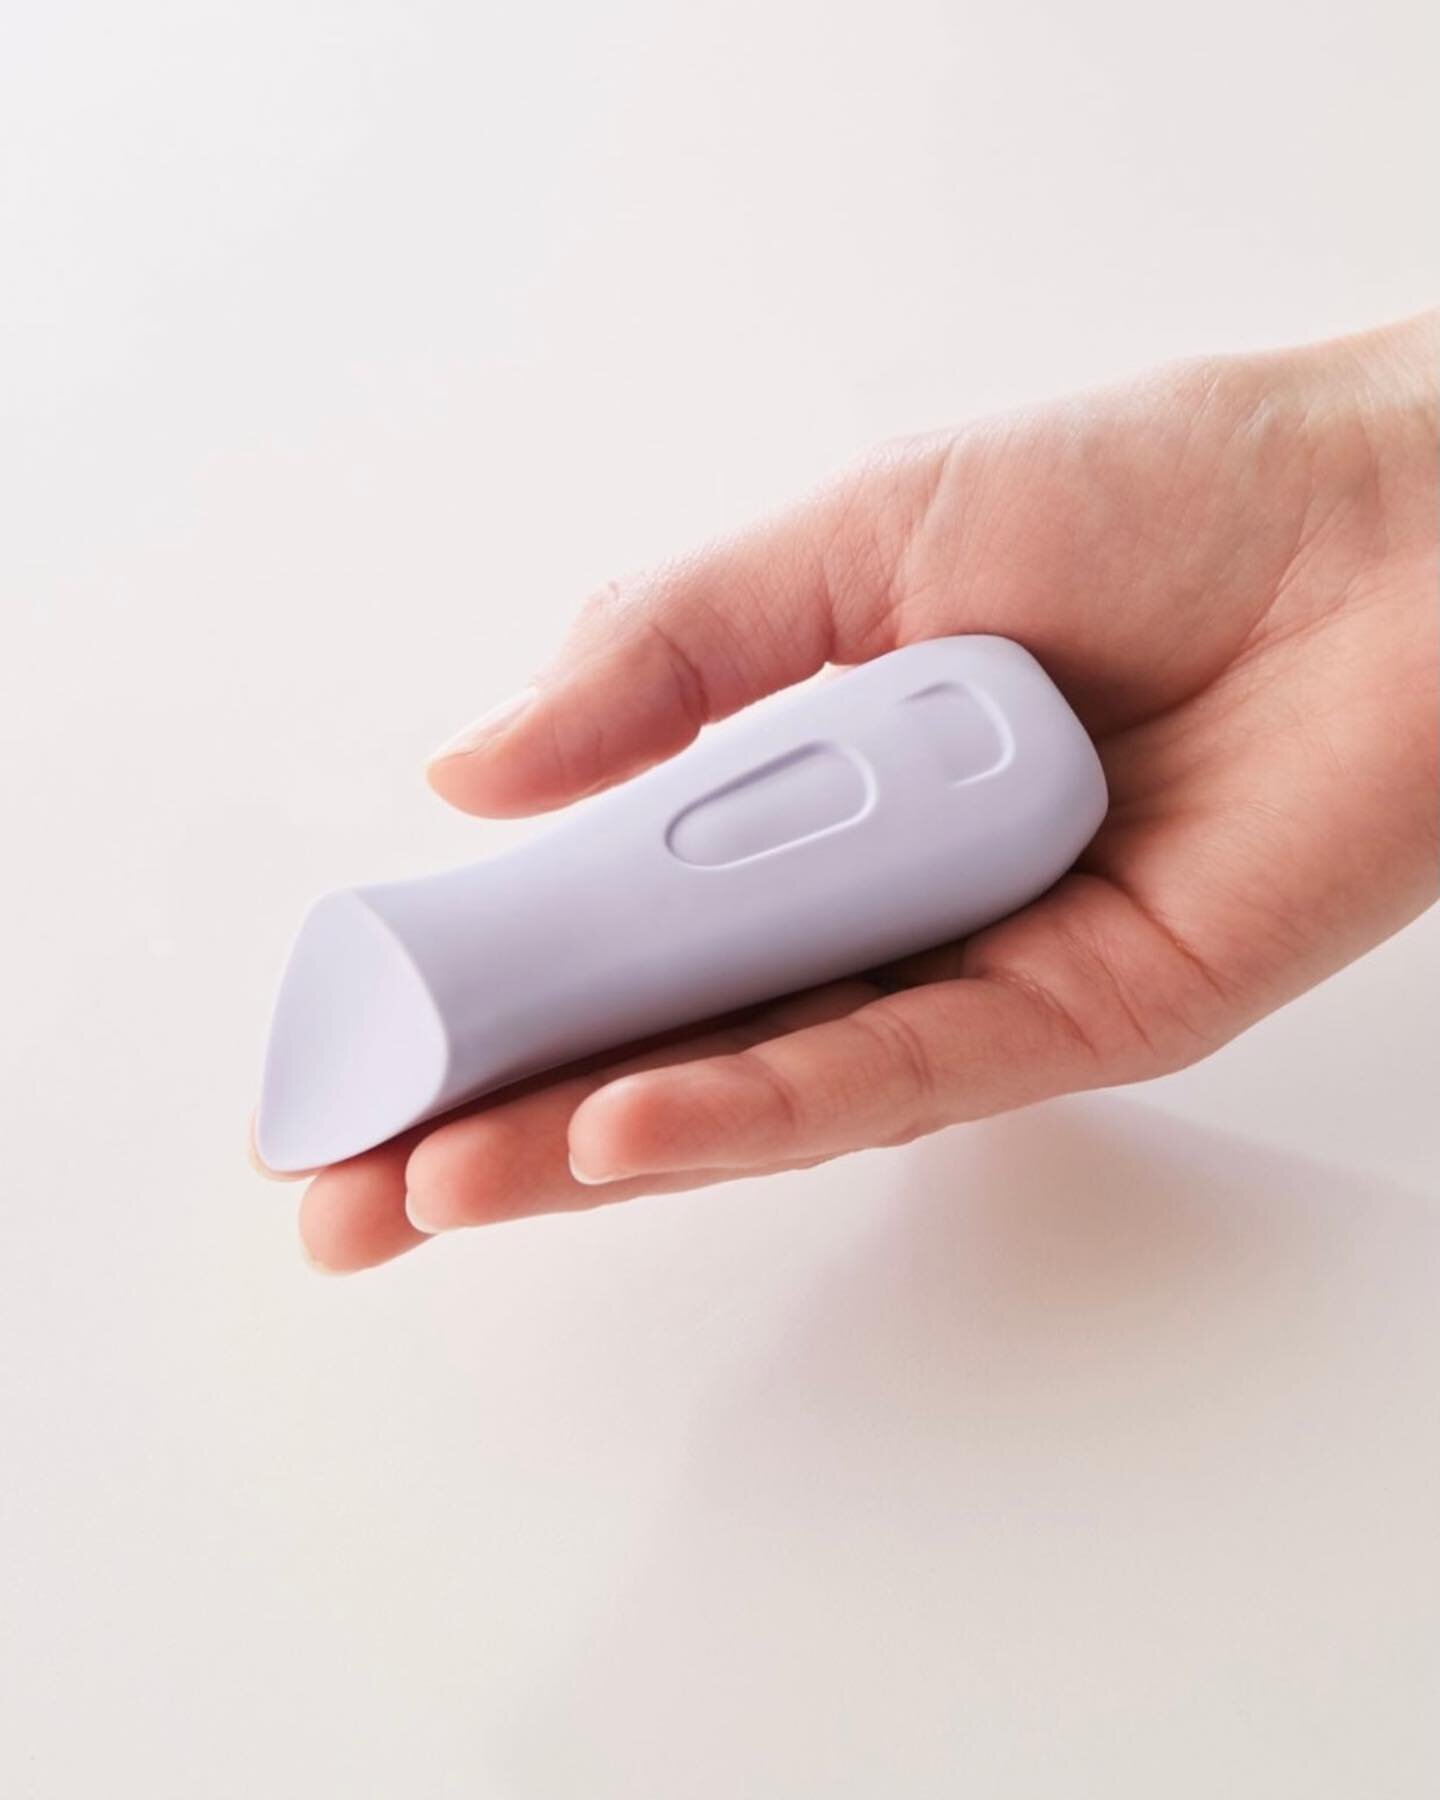 Pleasure is the point with Dame Products&rsquo; Kip vibrator, made from a soft-touch medical-grade silicone with a prism-inspired design. Handheld, lipstick-esque shape offers 5 patterns at 5 different vibrations levels with a specialized design that